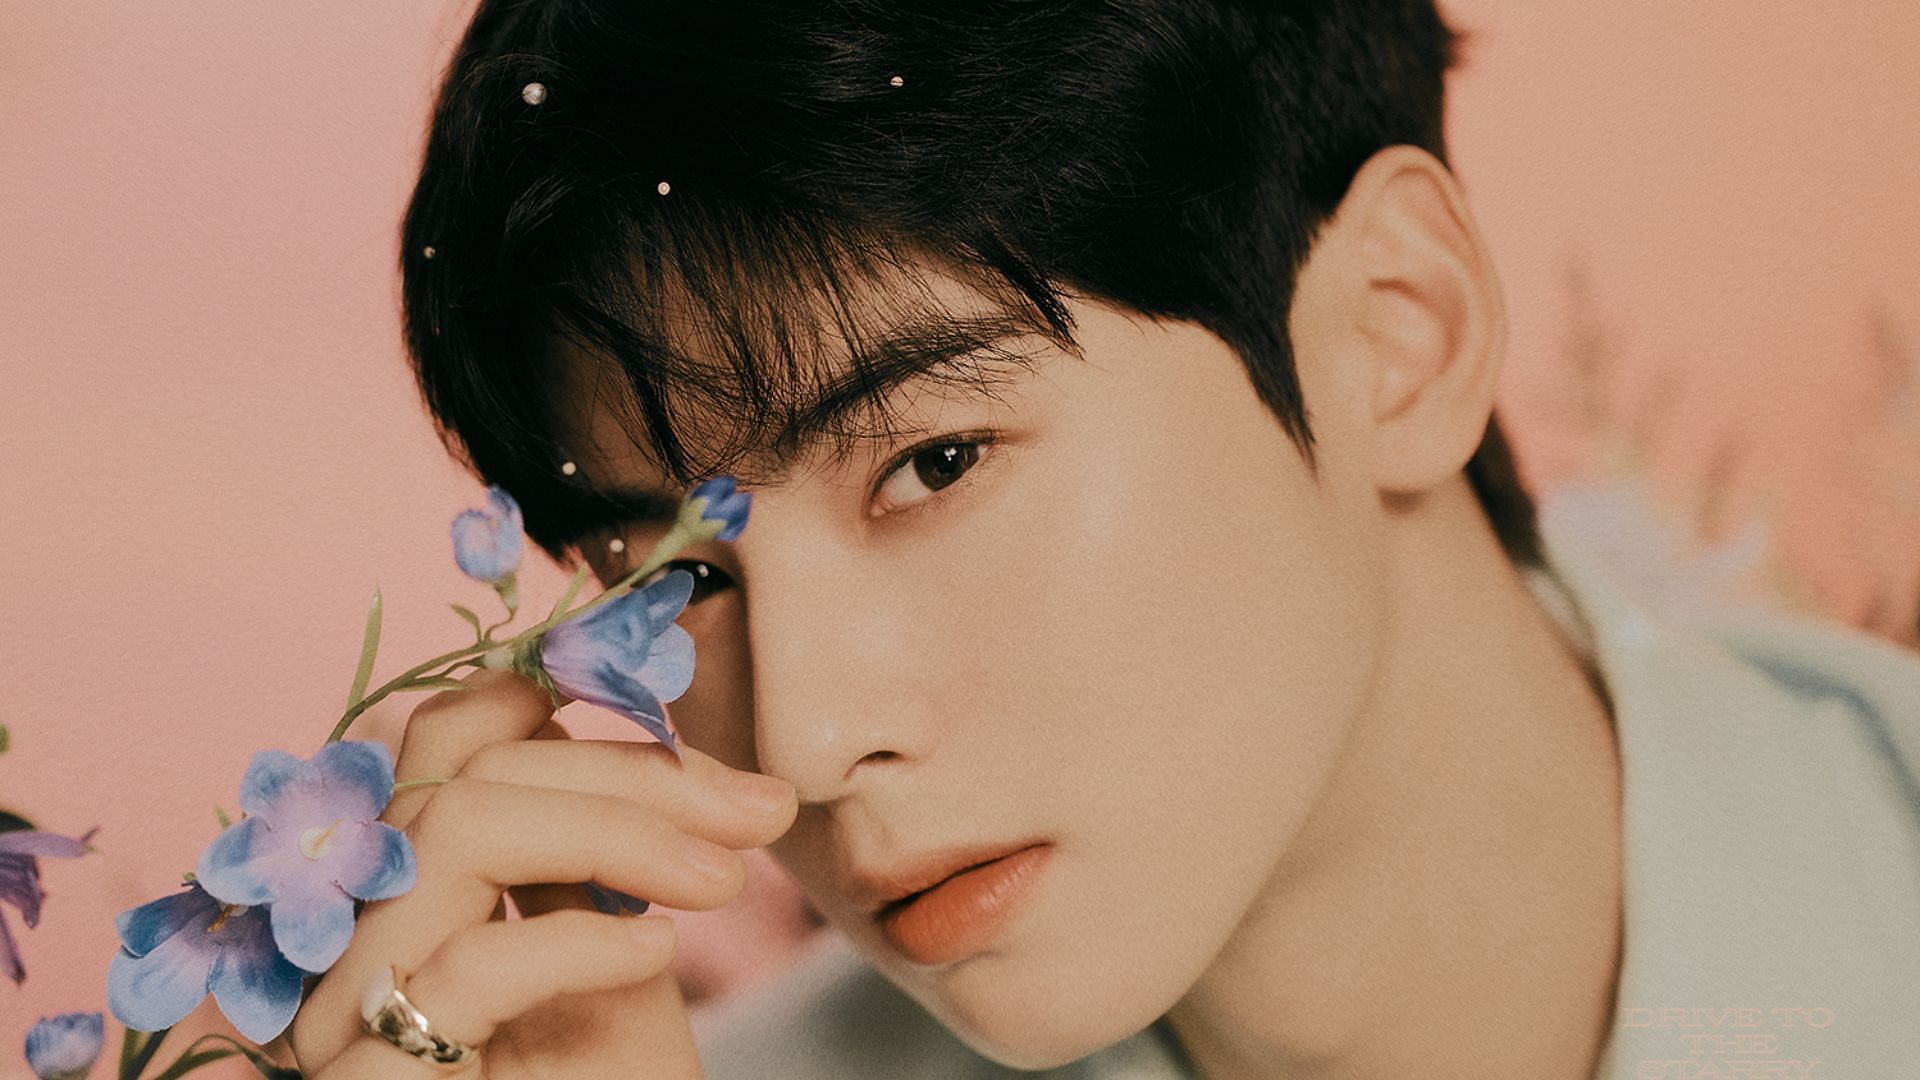 ASTRO's Cha Eunwoo Debuts A Completely New Hairstyle And Fans Are Loving It  - Koreaboo